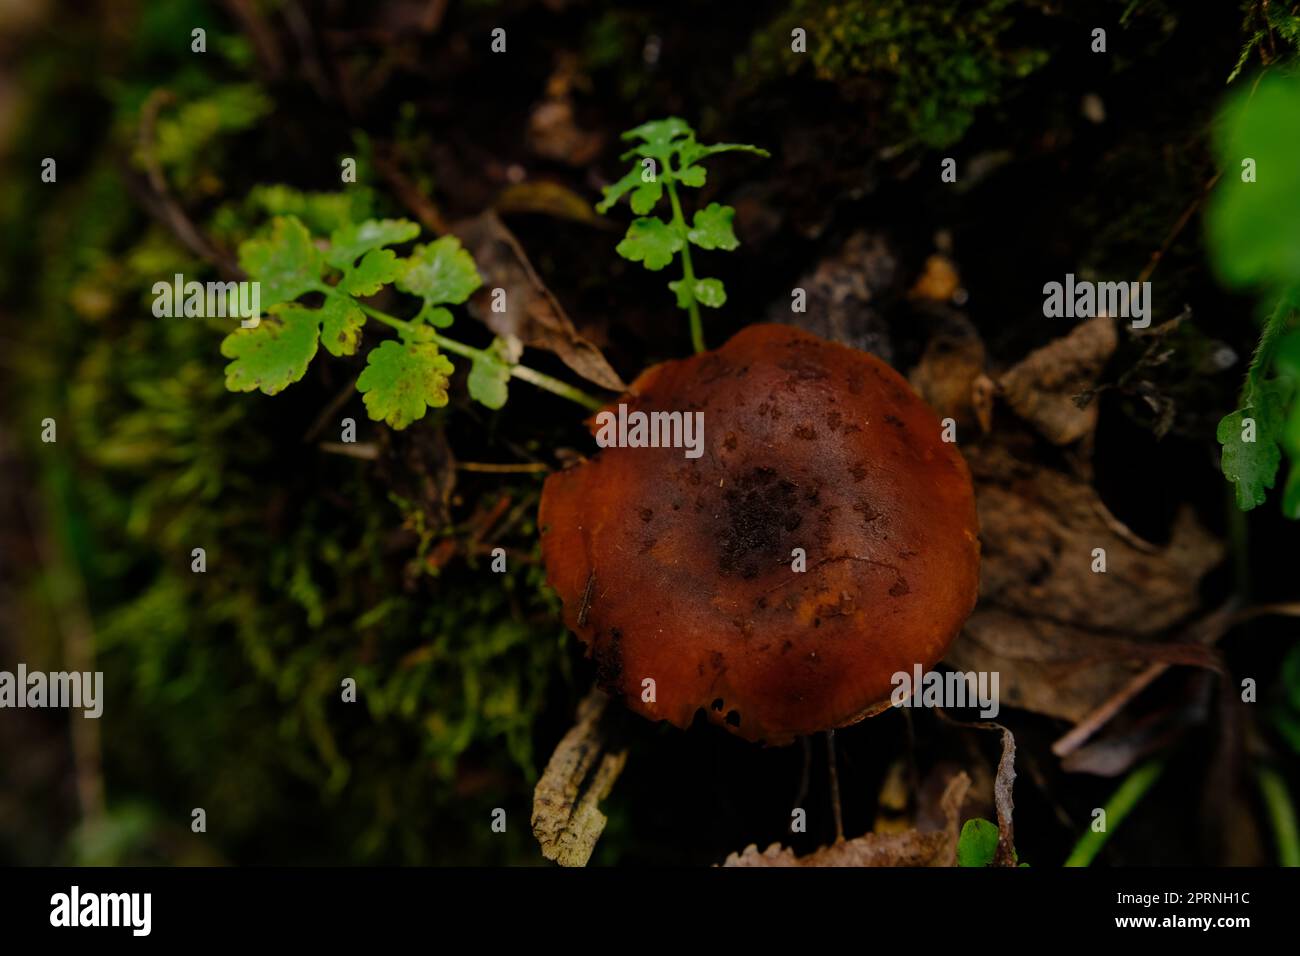 deadly webcap Cortinarius rubellus poisonous mushroom in forest. Stock Photo